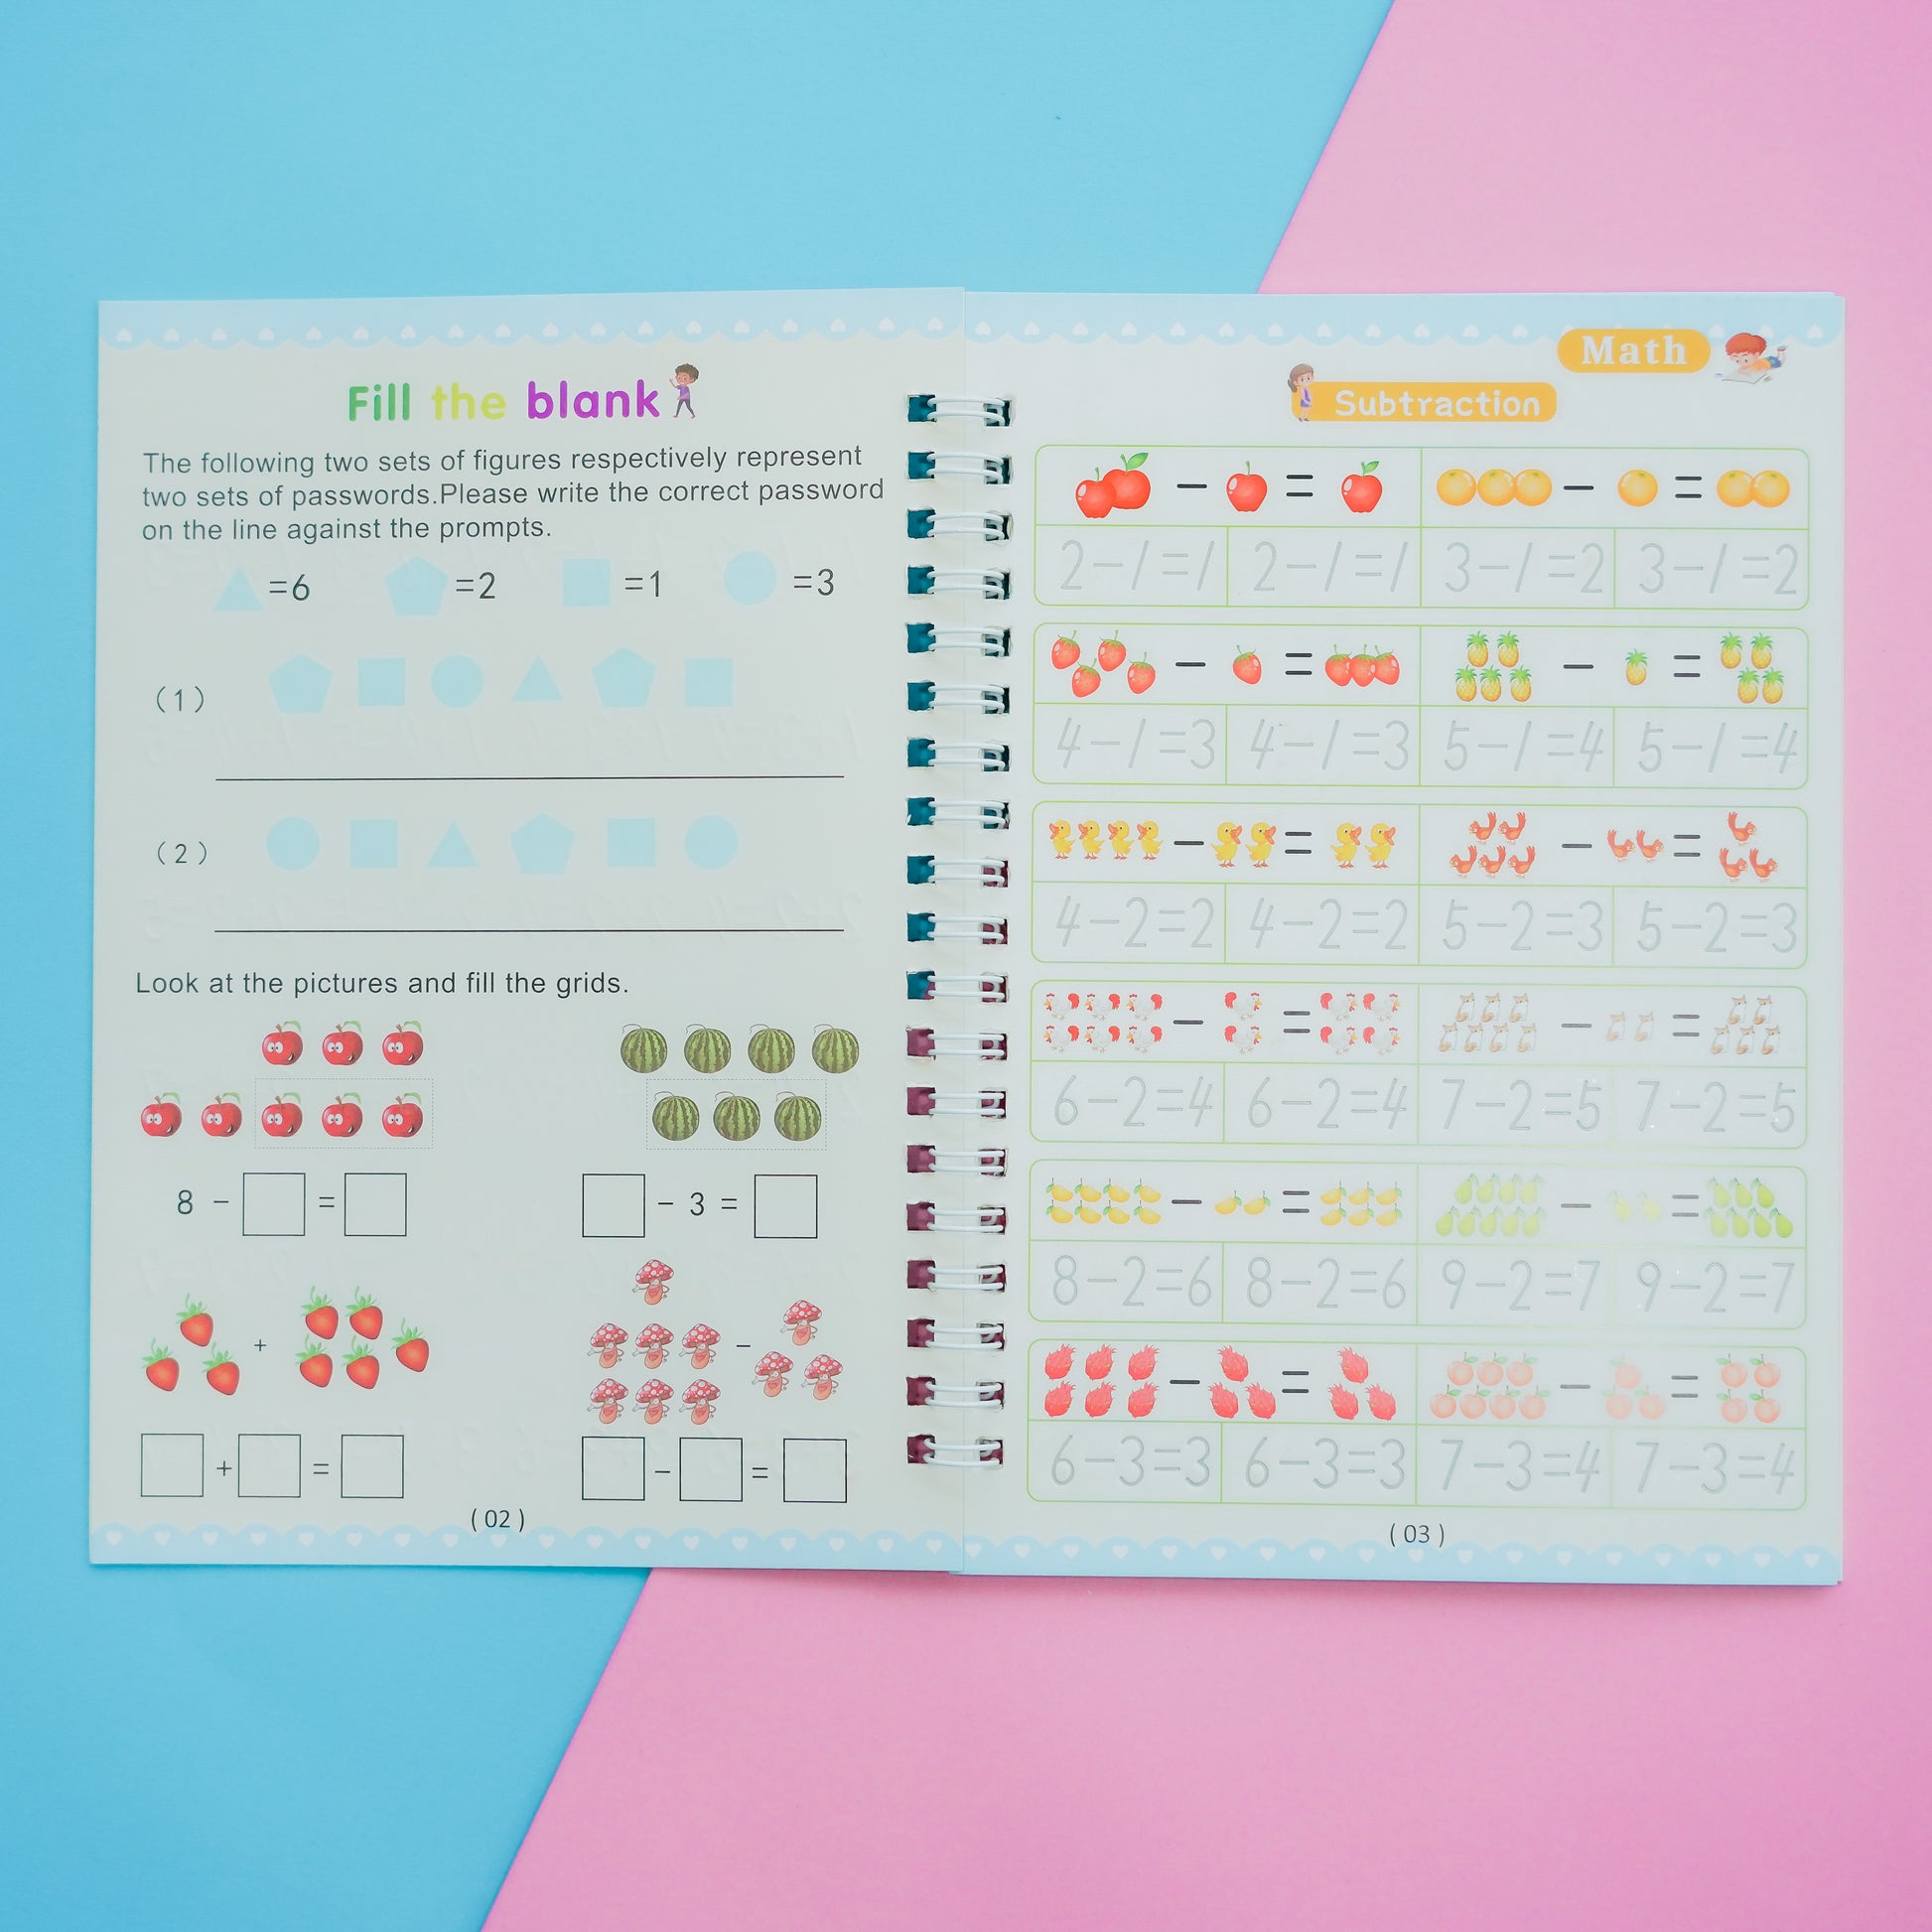 Alphabet + Number + Math Book – The Groovd